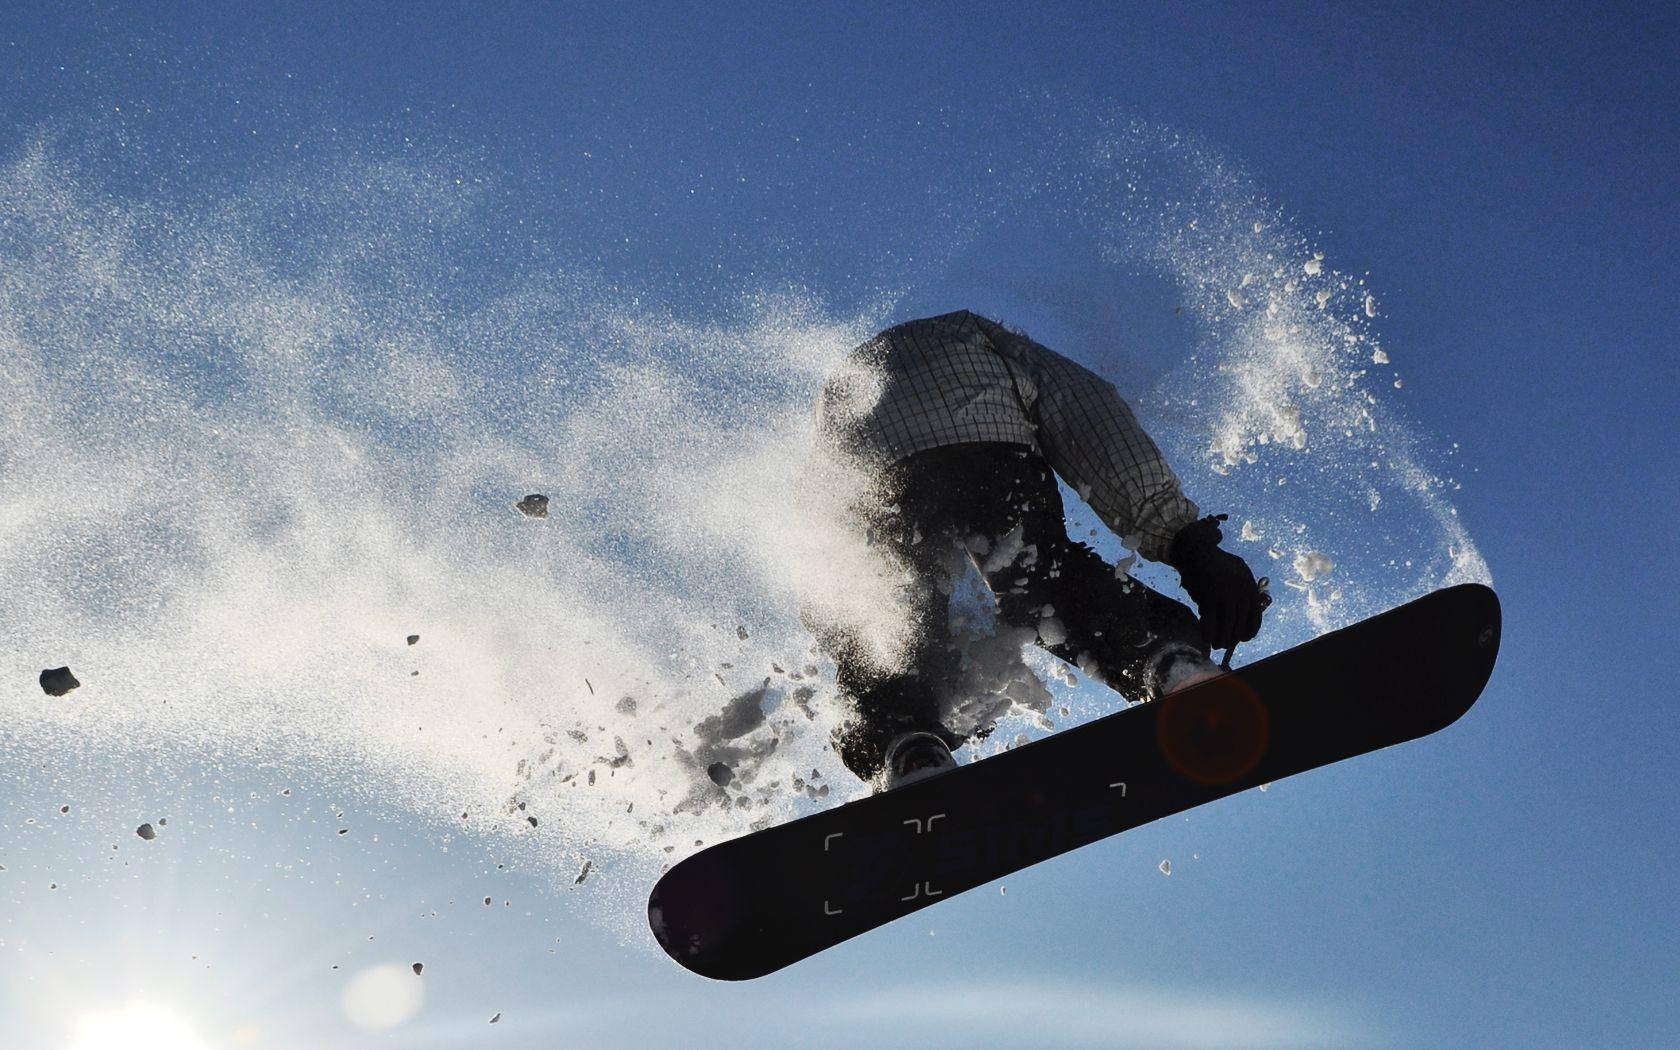 X Games Snowboarder Low-angle Shot